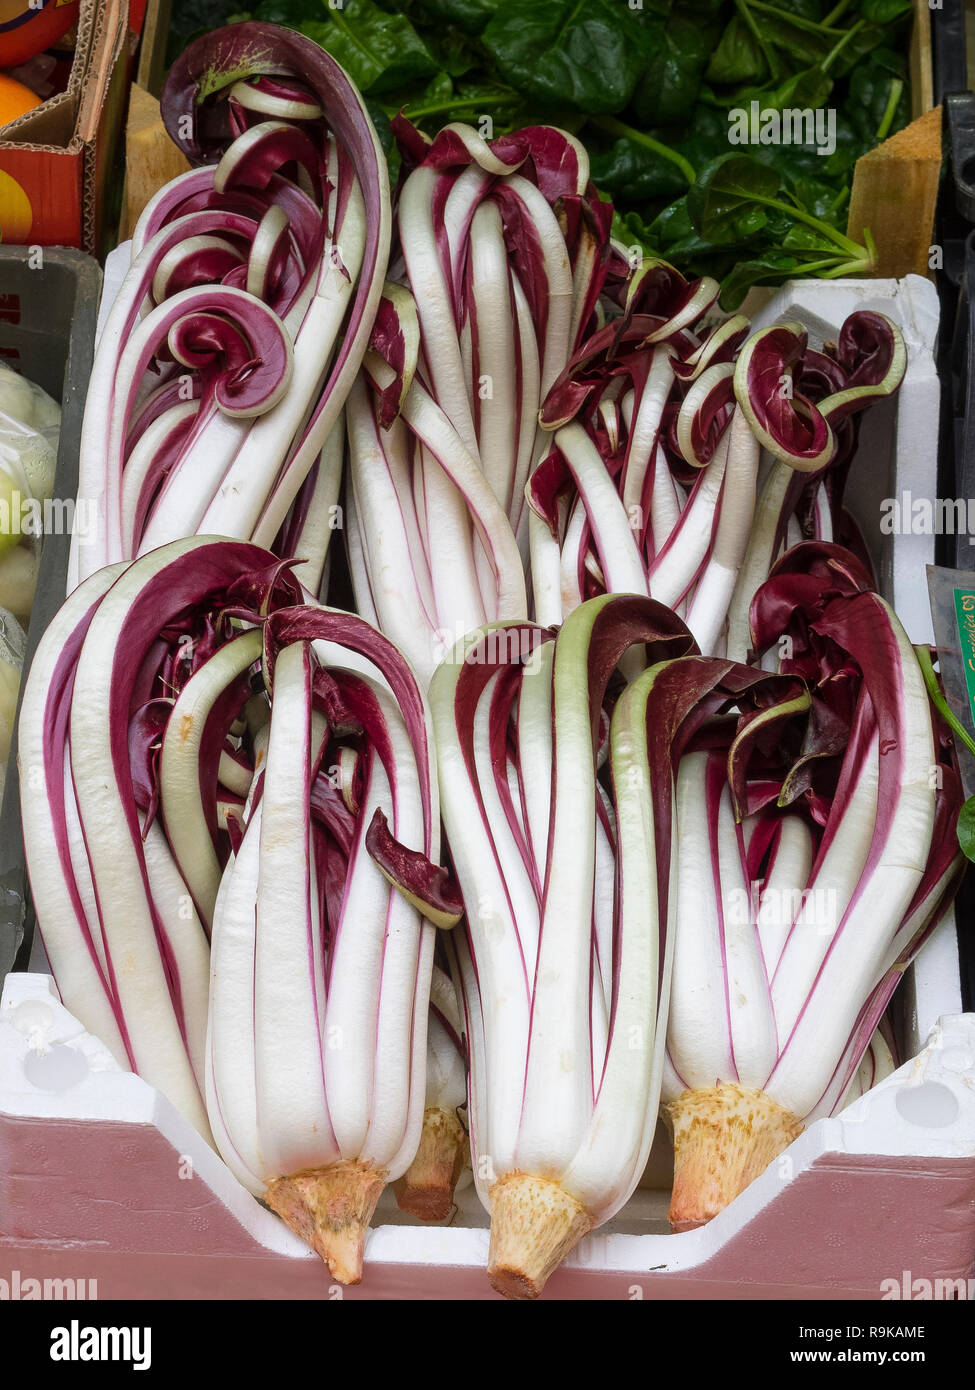 box full of fresh Treviso IGP tardive red radicchio delicious winter salad with white stems and red tops Stock Photo